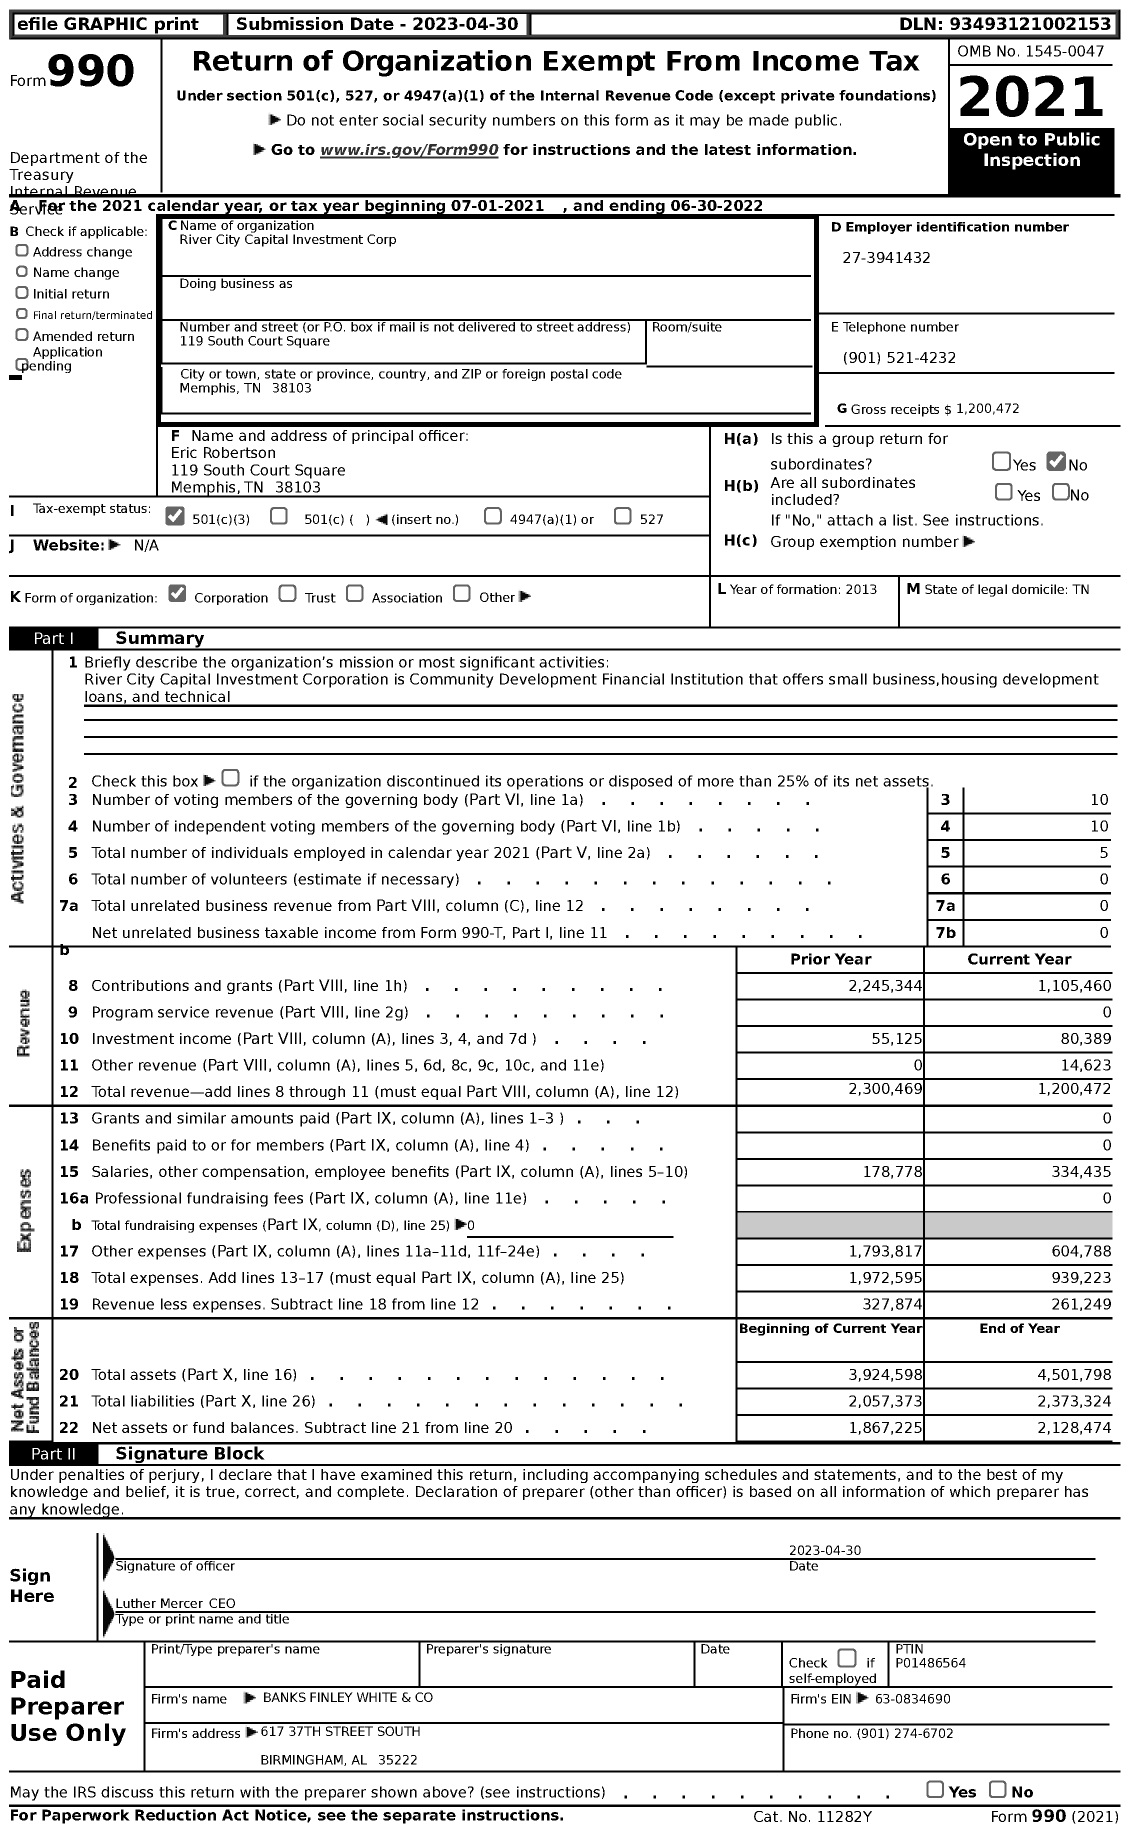 Image of first page of 2021 Form 990 for River City Capital Investment Corp